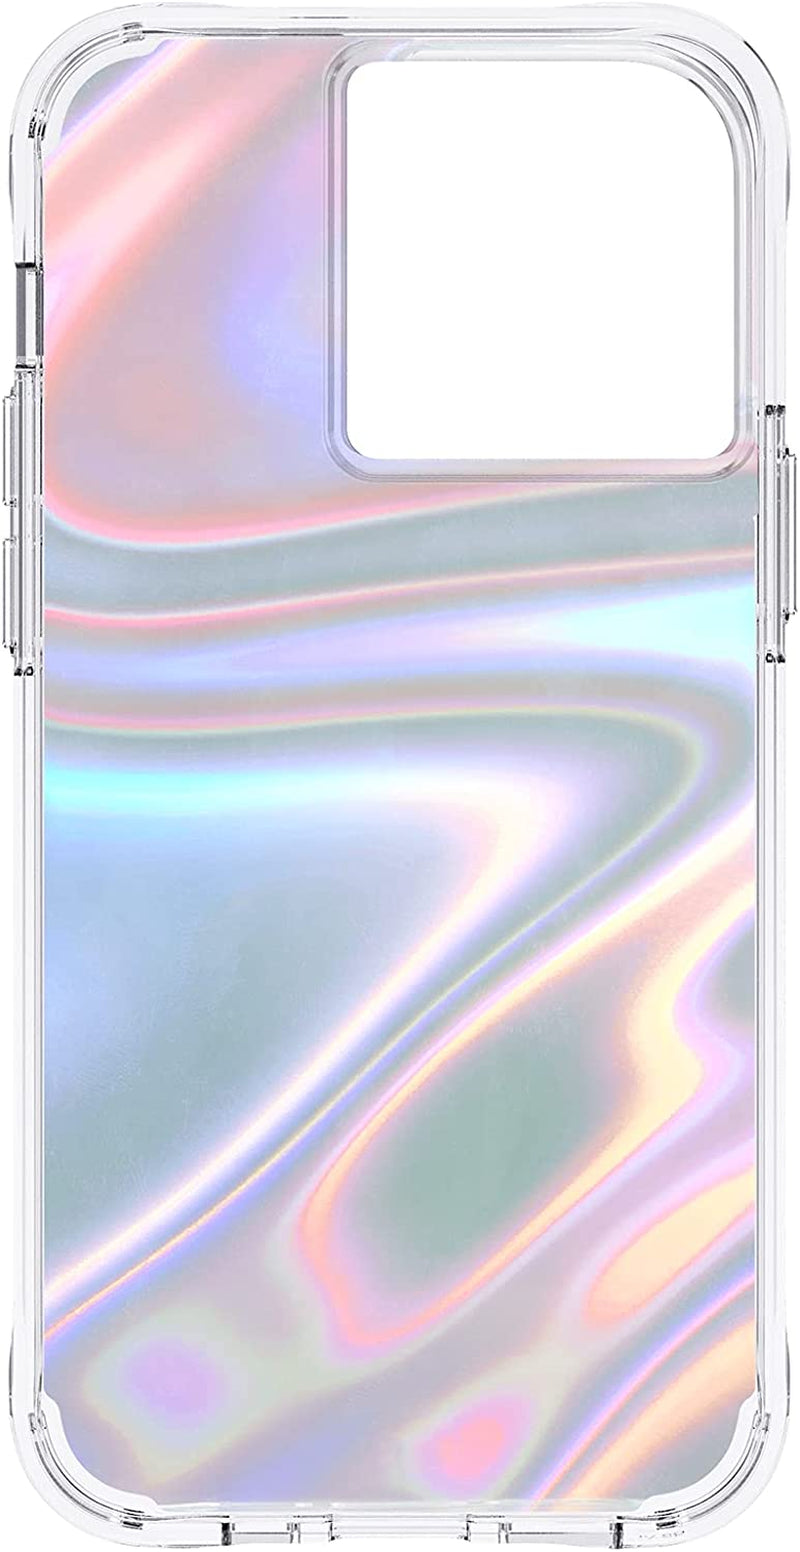 Iphone 13 Pro Case - Soap Bubble [10FT Drop Protection] [Wireless Charging Compatible] Luxury Cover with Iridescent Swirl Effect for Iphone 13 Pro 6.1", Anti-Scratch, Shockproof Materials